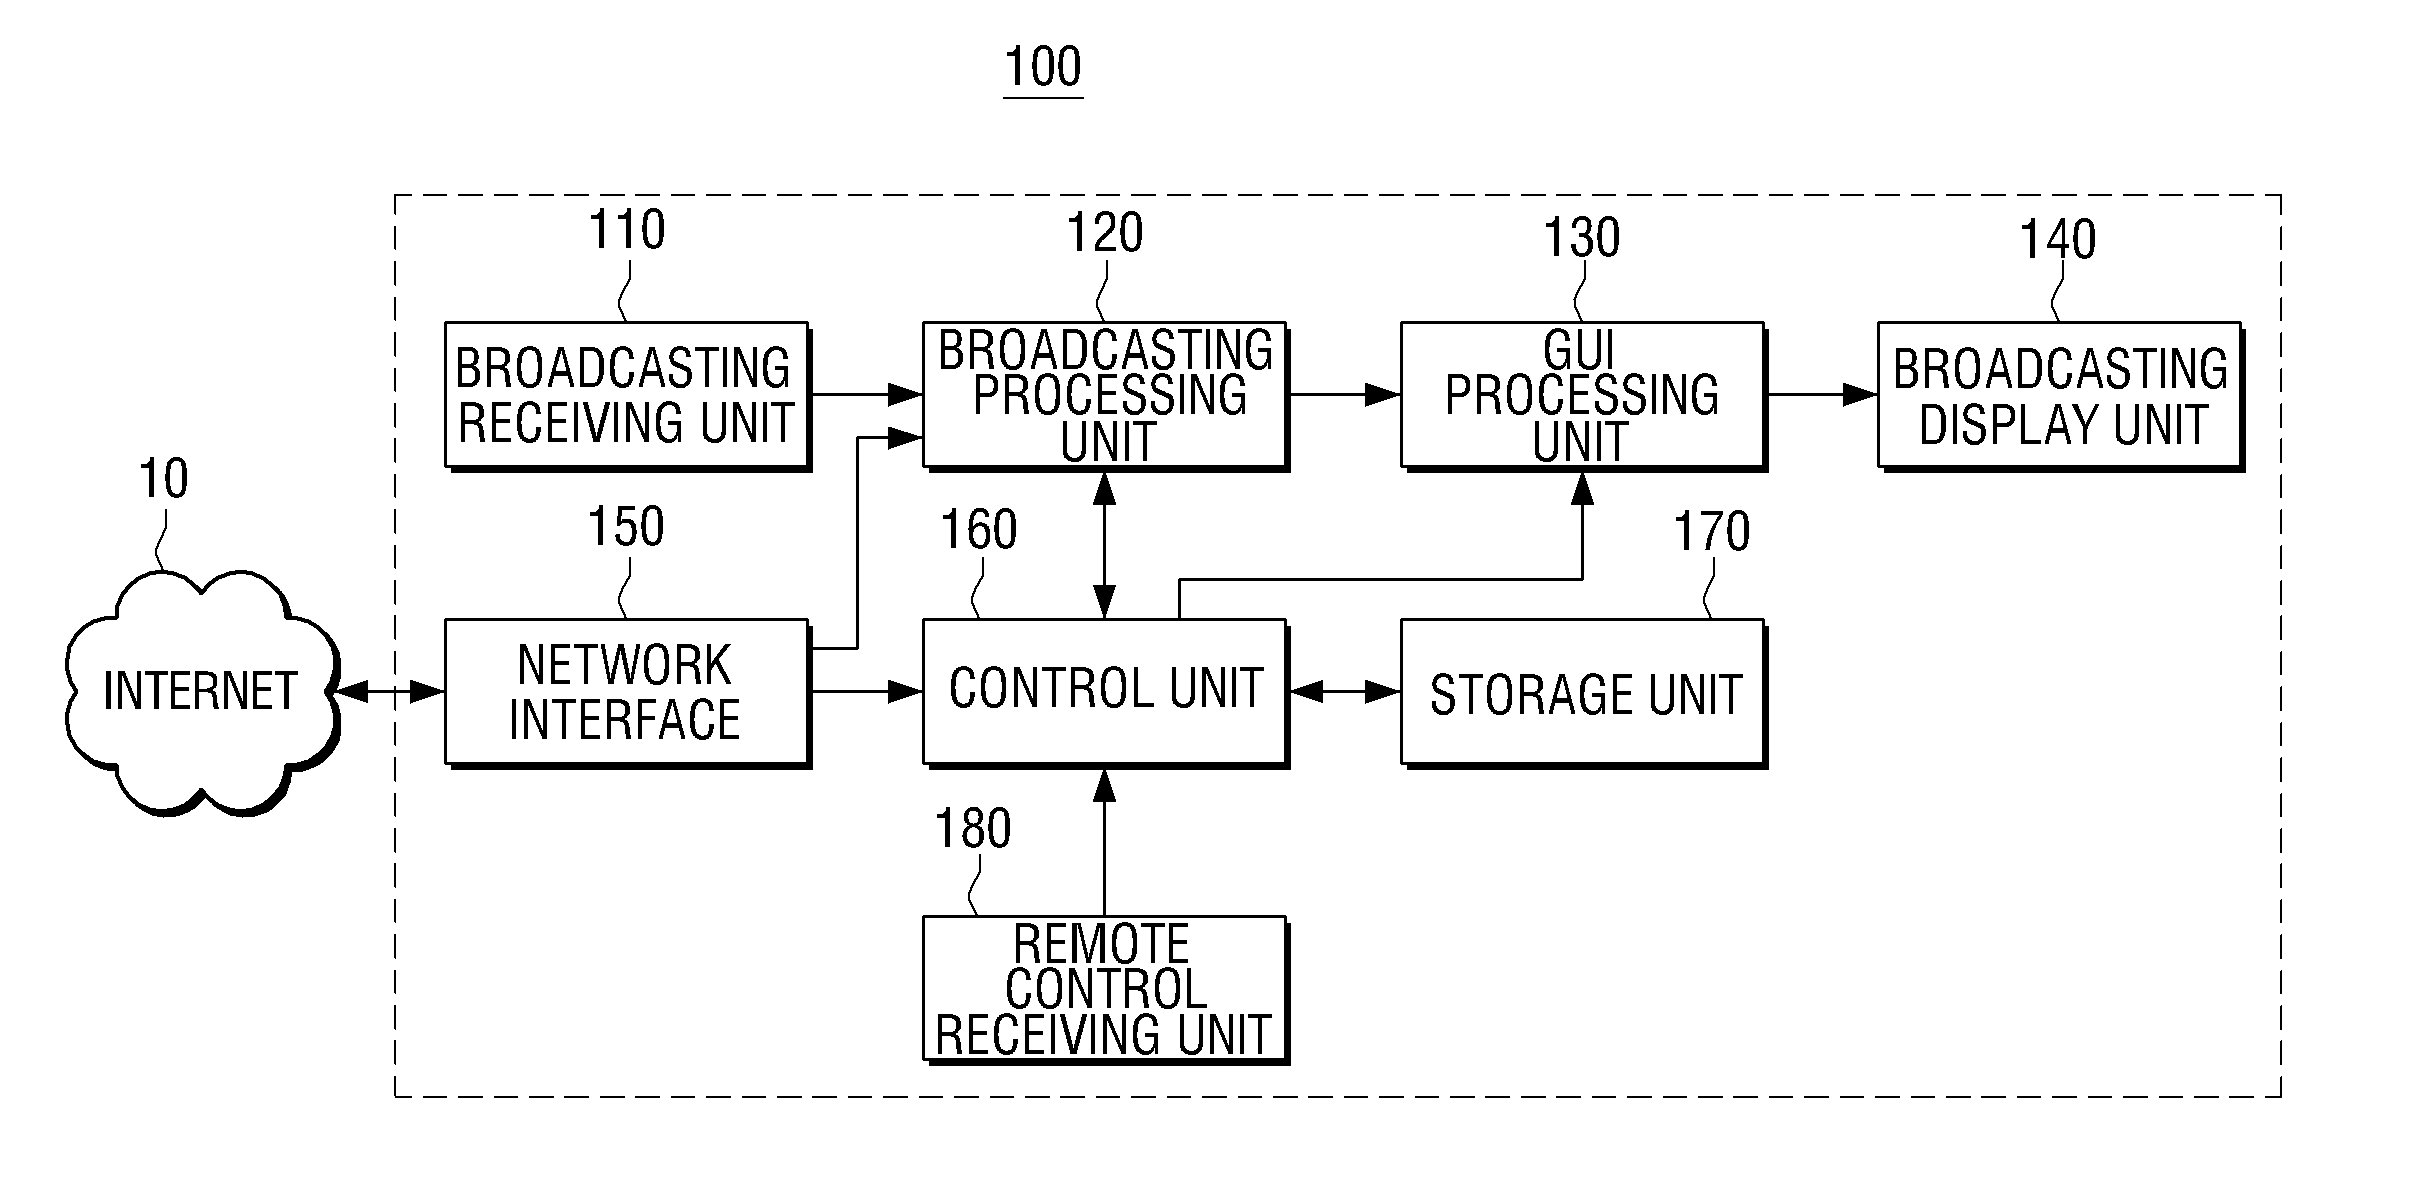 Method for transmitting contents information, recommending contents, and providing reliability for recommended contents, and multimedia device using the same